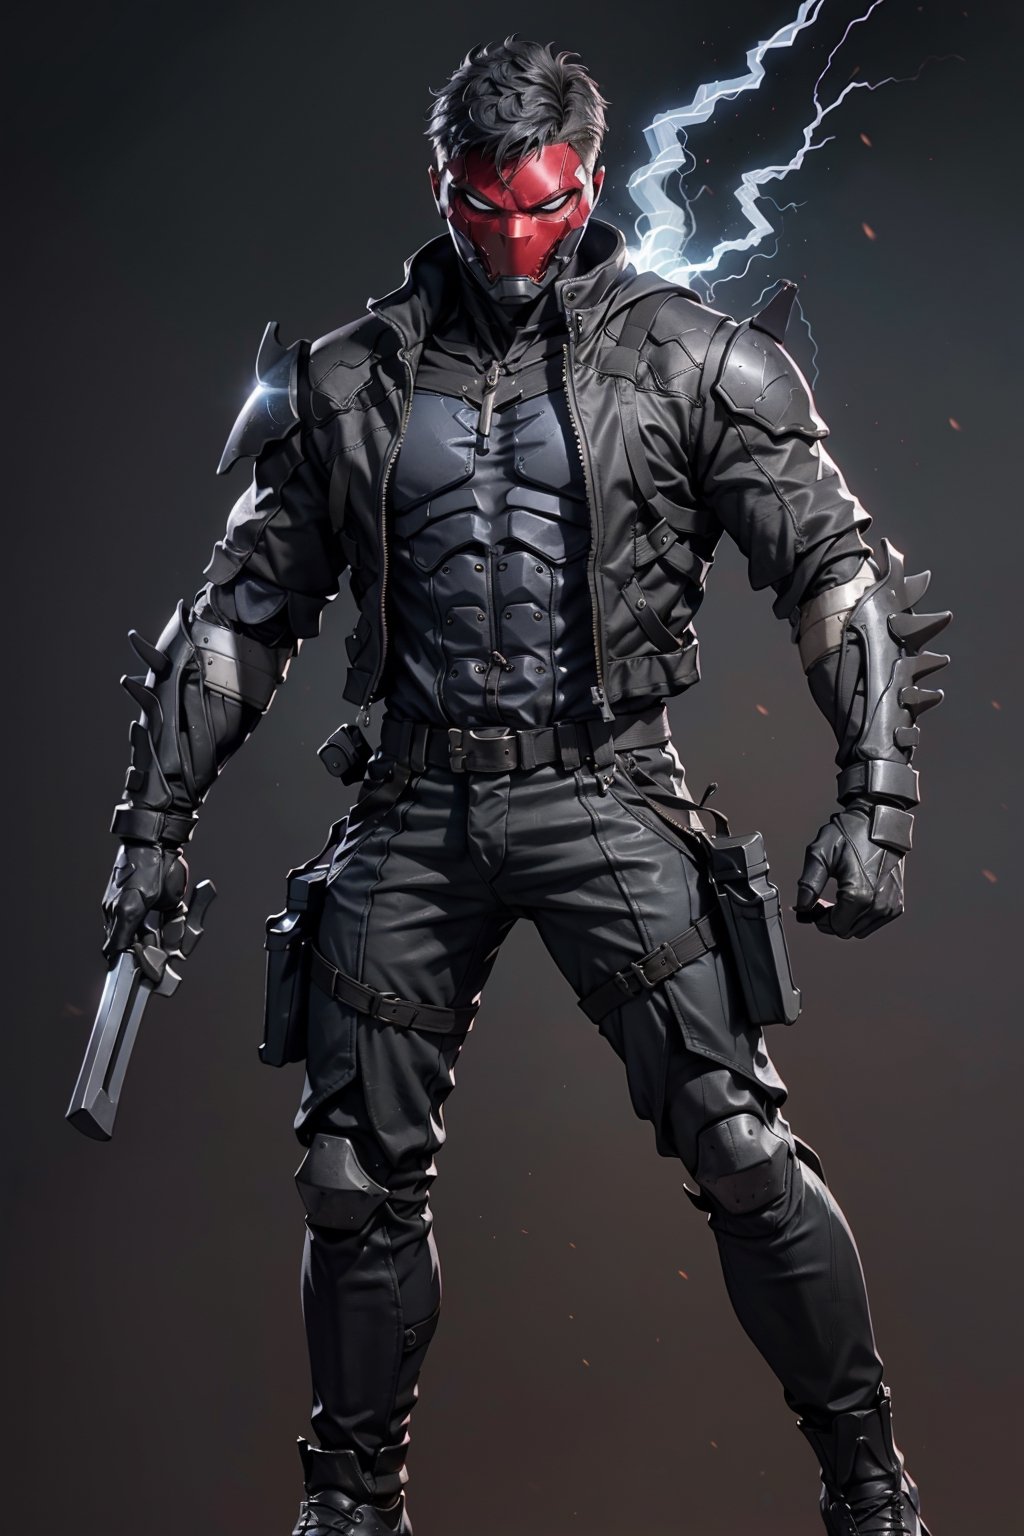 
an accurate and detailed full-body shot of a male superhero character named Wraith, tall and lean bulid, (Crimson half-mask), exposed cybernetic red eye, grafted cybernetic jawline, (Spiky white fringe hair), (choppy black undercut hair), Skintight black ninja-tech suit with crimson energized circuitry, (electric blue biker jacket), asymmetric collar, rolled sleeves, Gunmetal armor plates on shoulders, chest emblem, (Fitted burgundy leather moto-pants), (blue-gray armorized cargo panels), Knee guards, armored greaves, black combat boots, cyberized gunmetal strike gauntlet, Holsters, sheaths, tech-utility pouches, holding an obsidian high-frequency katana, masterpiece, high quality, 4K, raidenmgr, nero, rhdc, a man, red helment, brown leather jacket, gray skintight suit, gloves, belt, boots